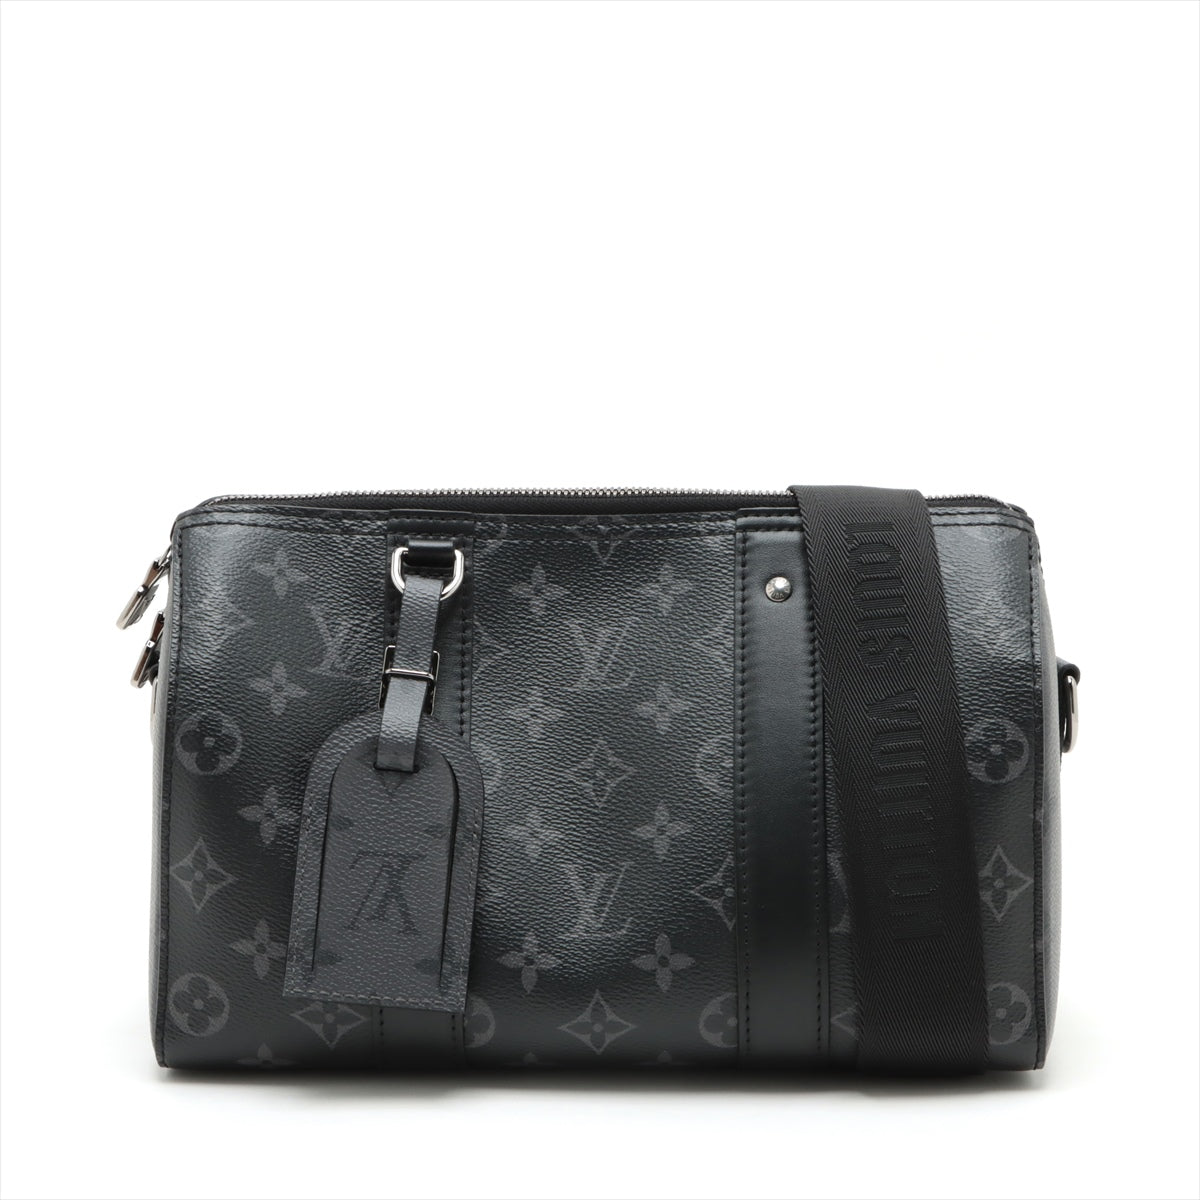 Louis Vuitton Monogram Eclipse City Keepall M45936 There was an RFID response